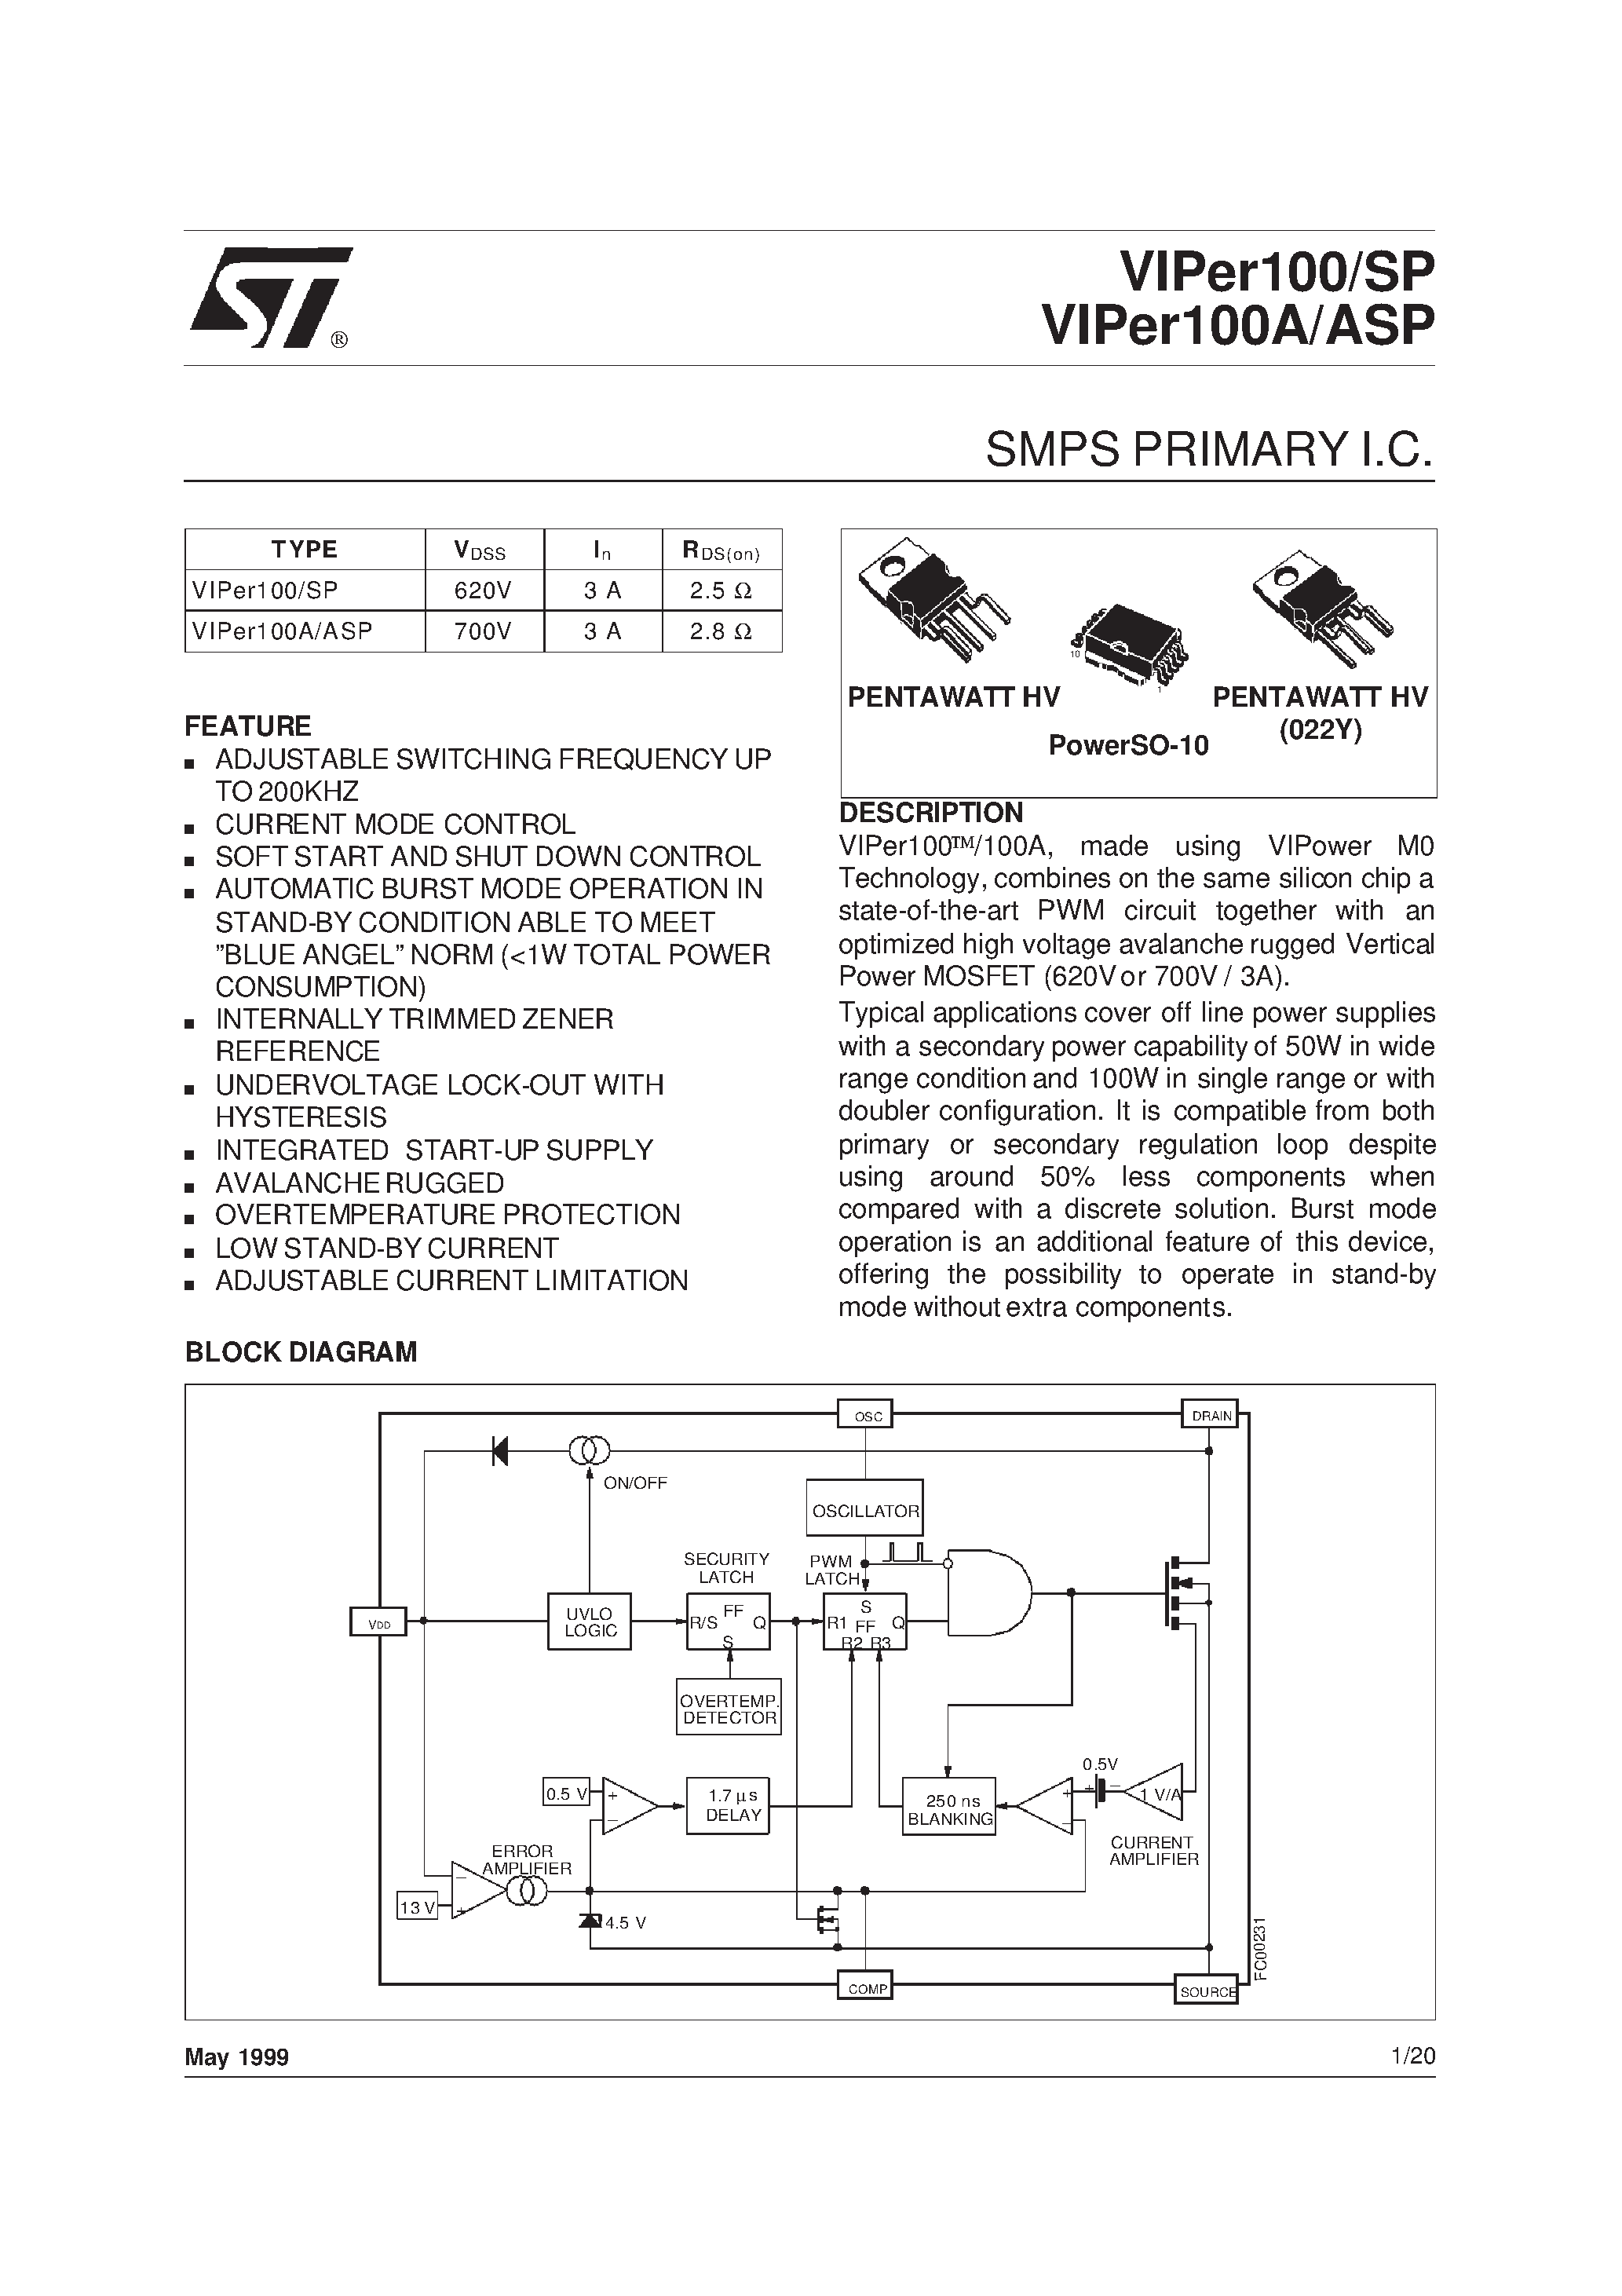 Datasheet VIPer100SP - SMPS PRIMARY I.C. page 1